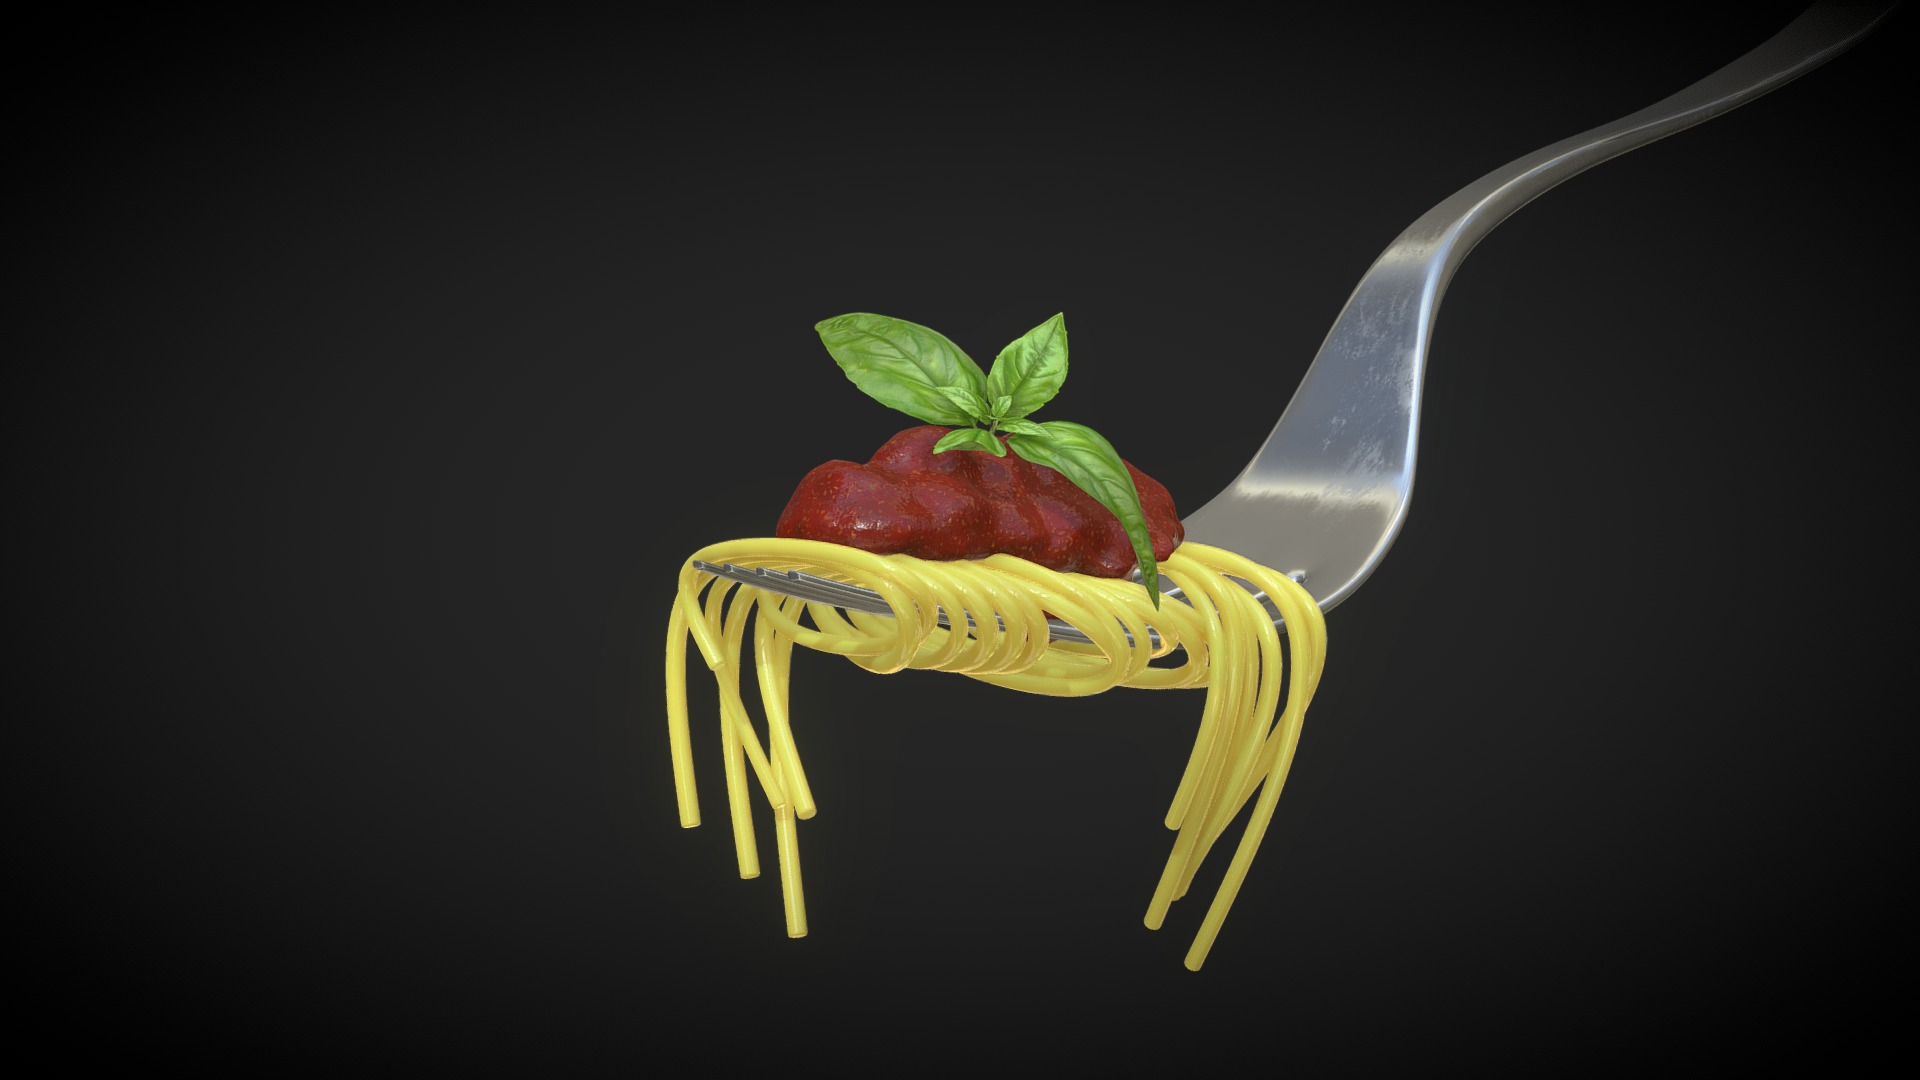 3D model The fork - This is a 3D model of the The fork. The 3D model is about a spoon with a strawberry on it.